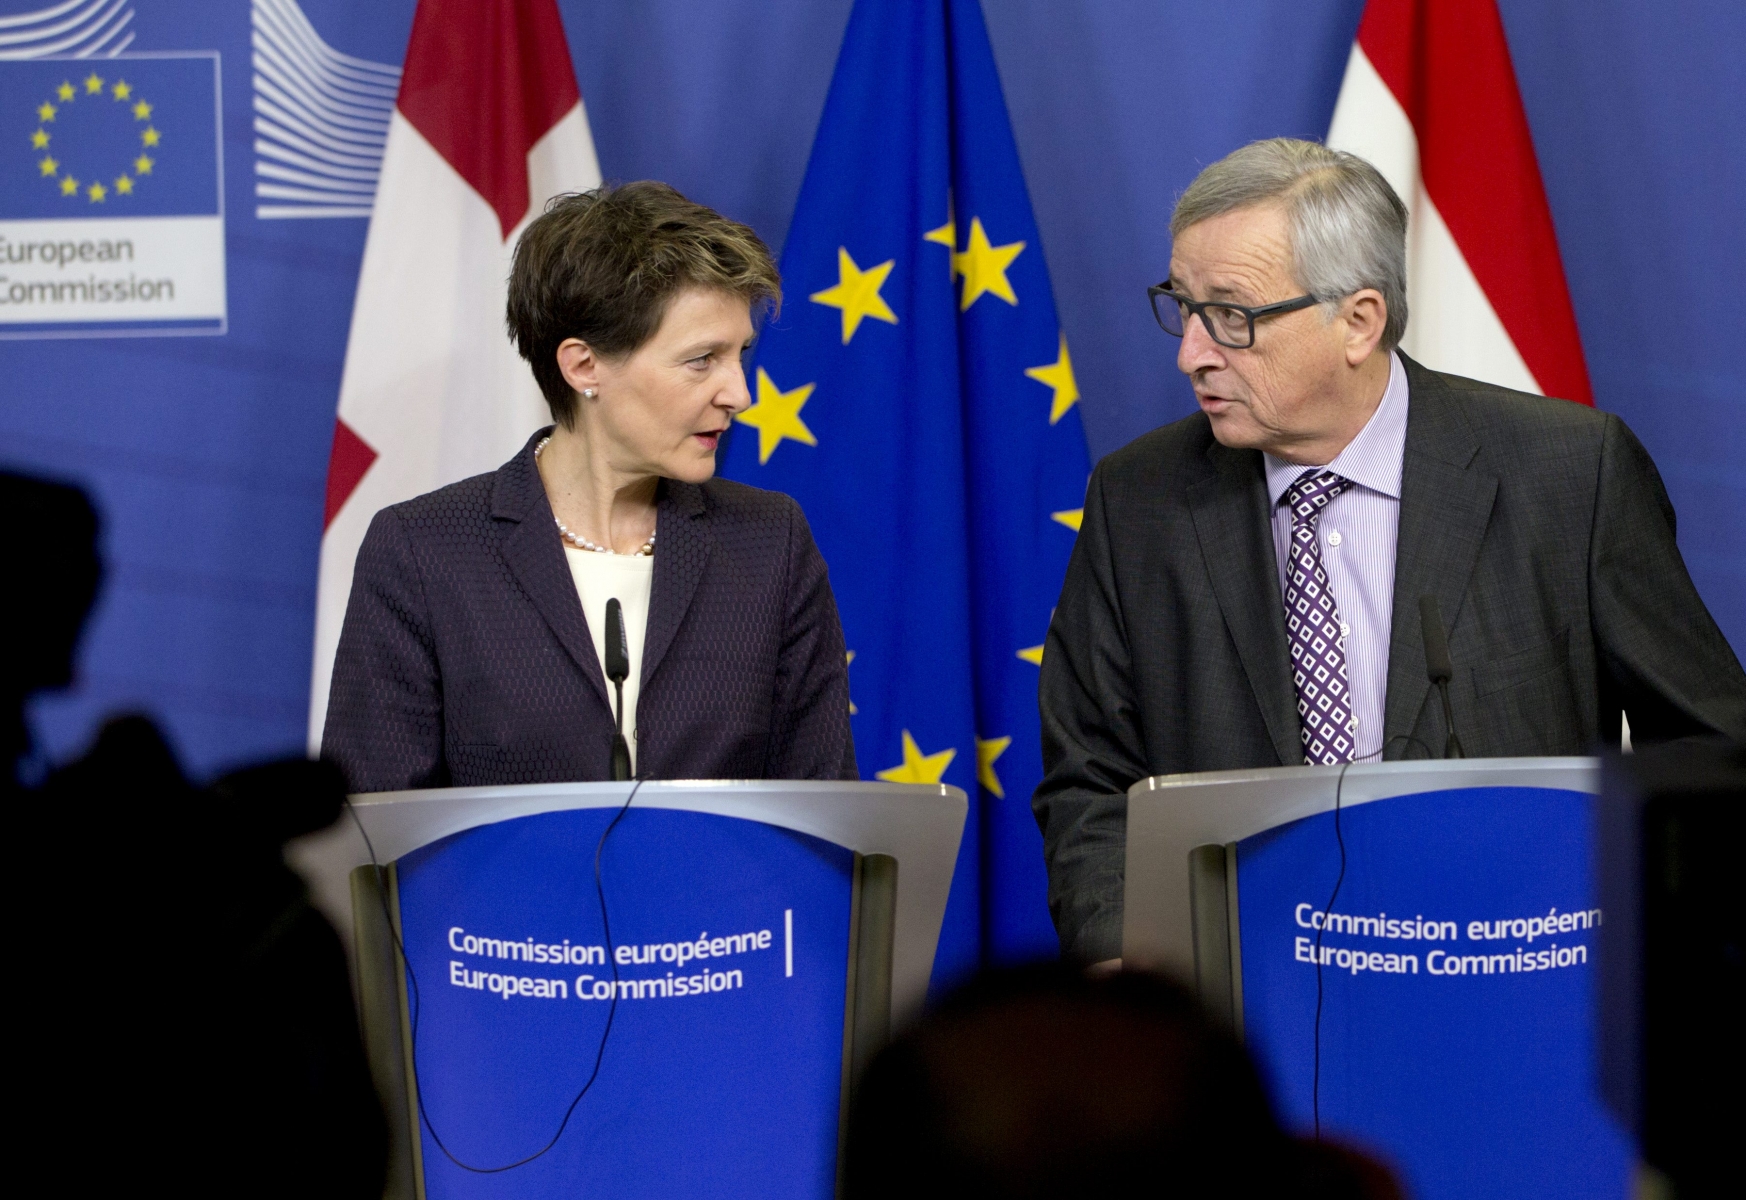 European Commission President Jean-Claude Juncker, right, and President of the Swiss Confederation Simonetta Sommaruga, participate in a media conference after a meeting at EU headquarters in Brussels on Monday, Dec. 21, 2015. (AP Photo/Virginia Mayo)